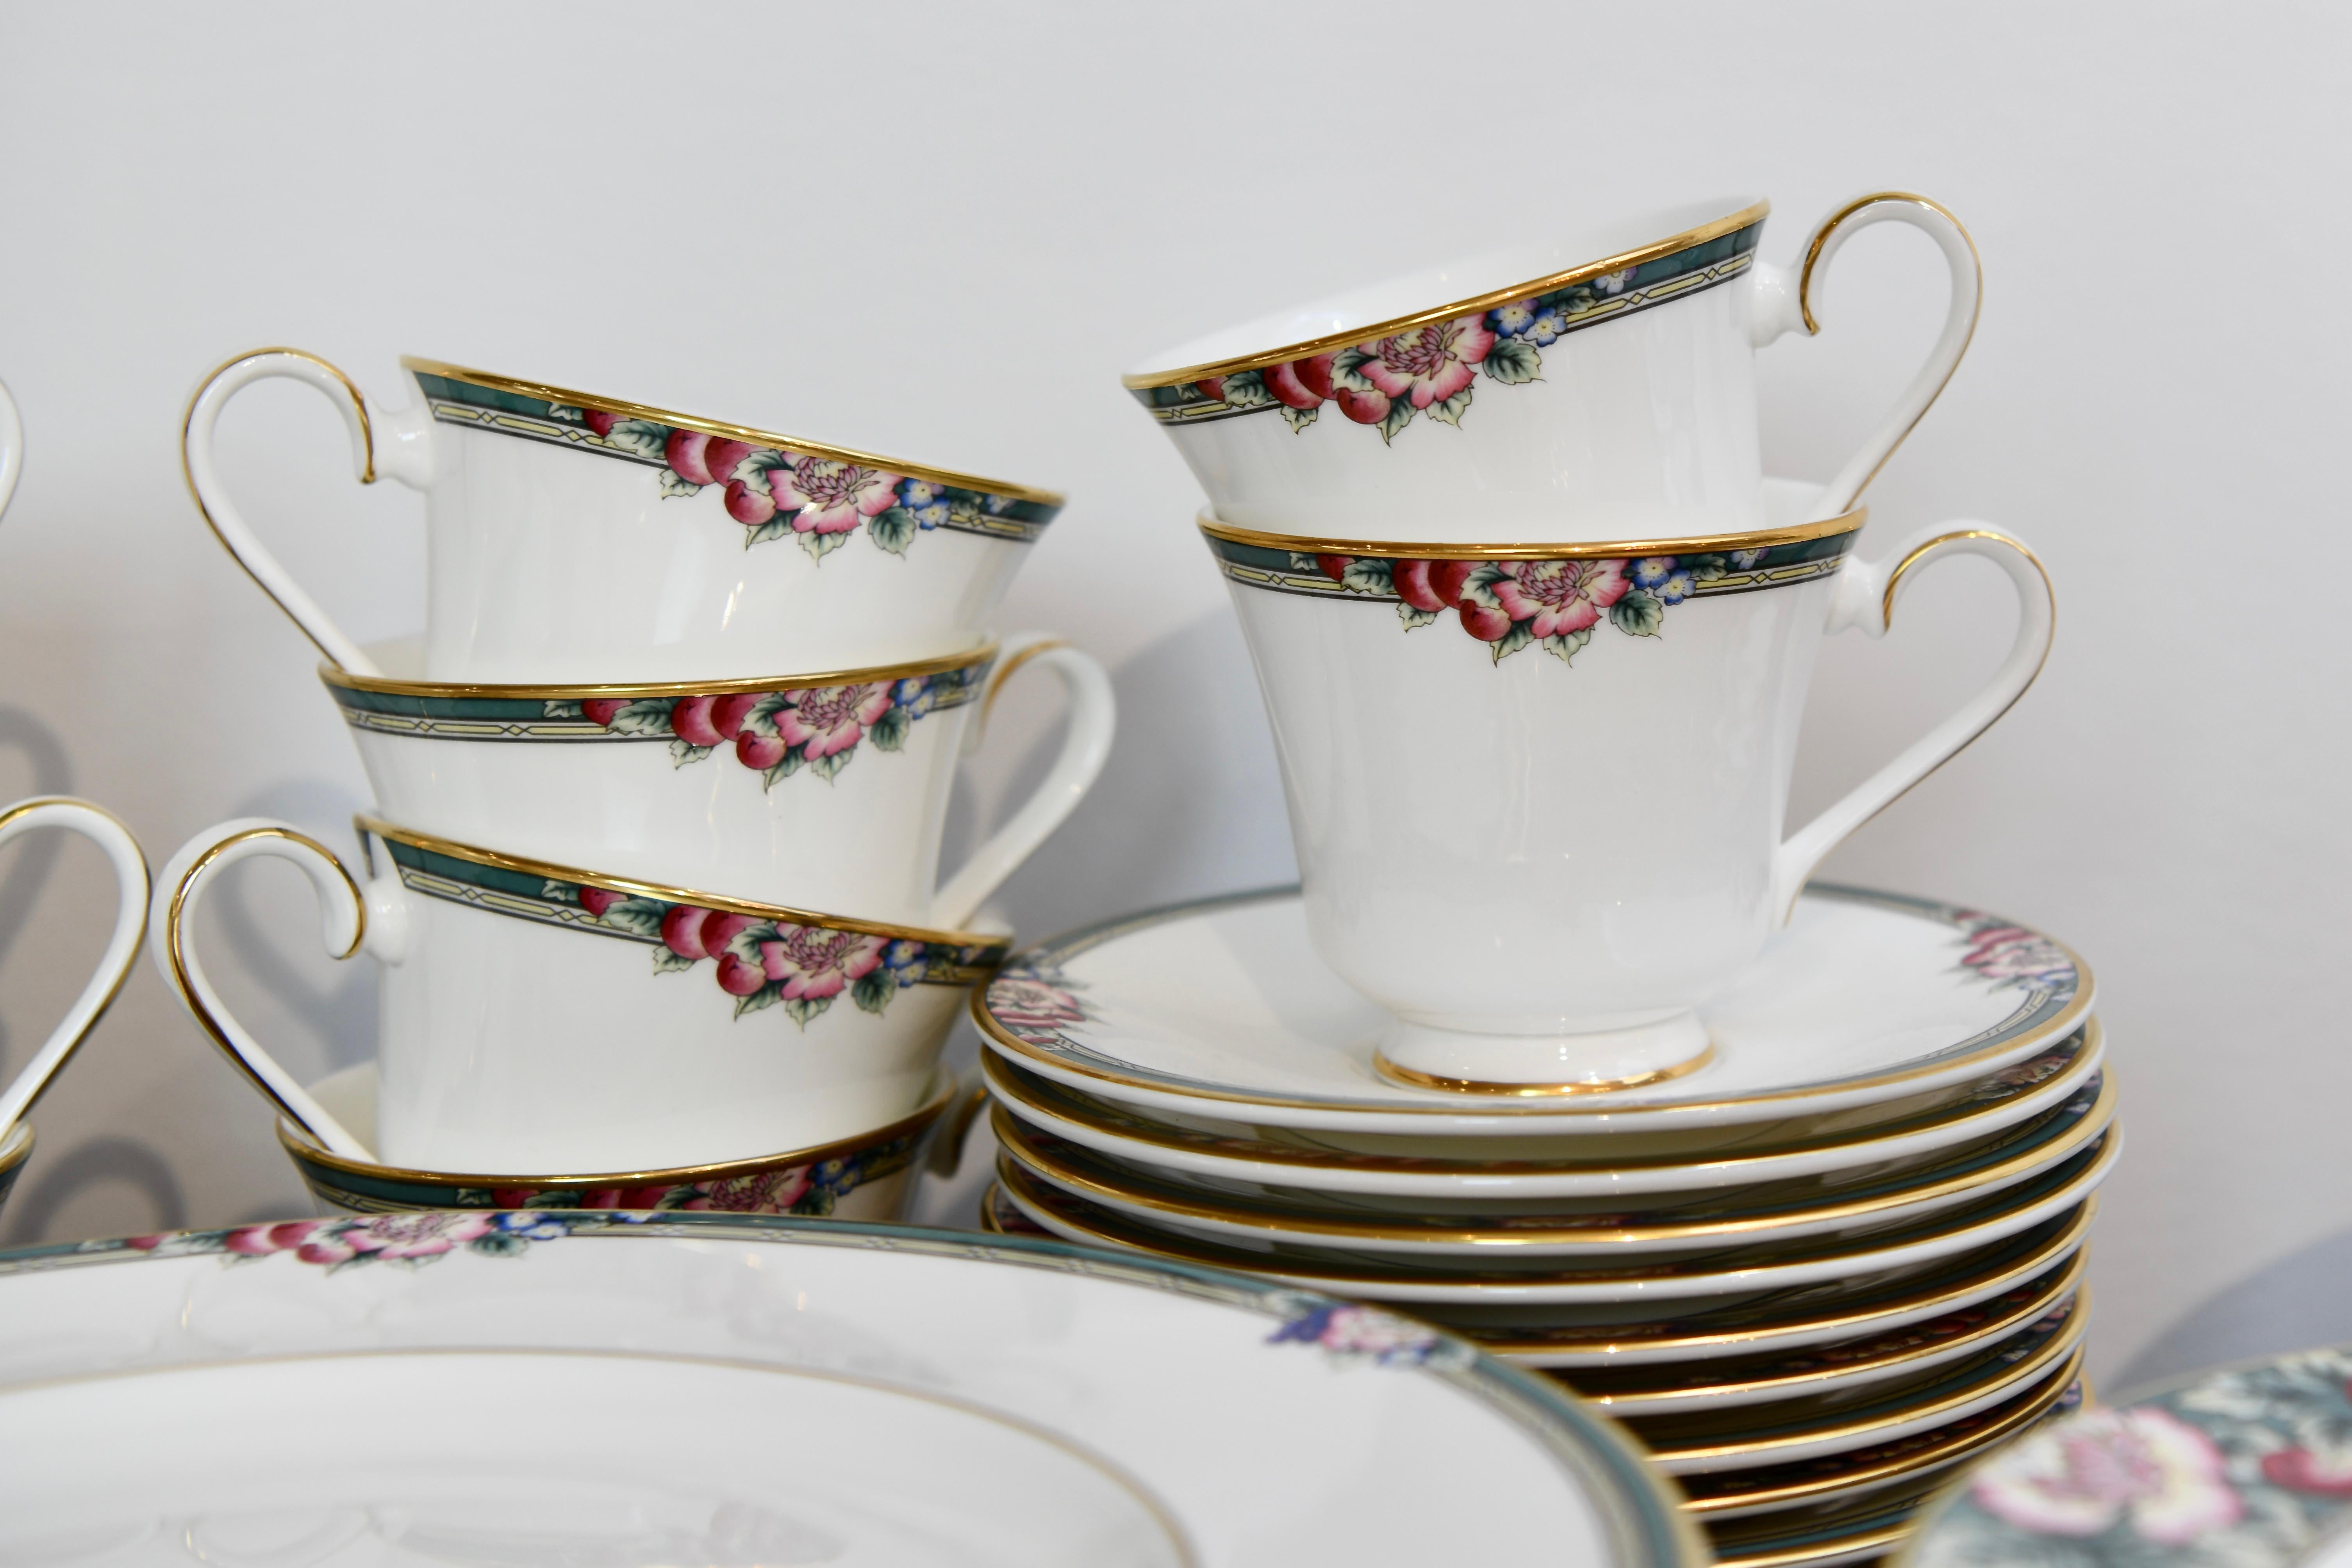 royal orchid dinner set price in pakistan